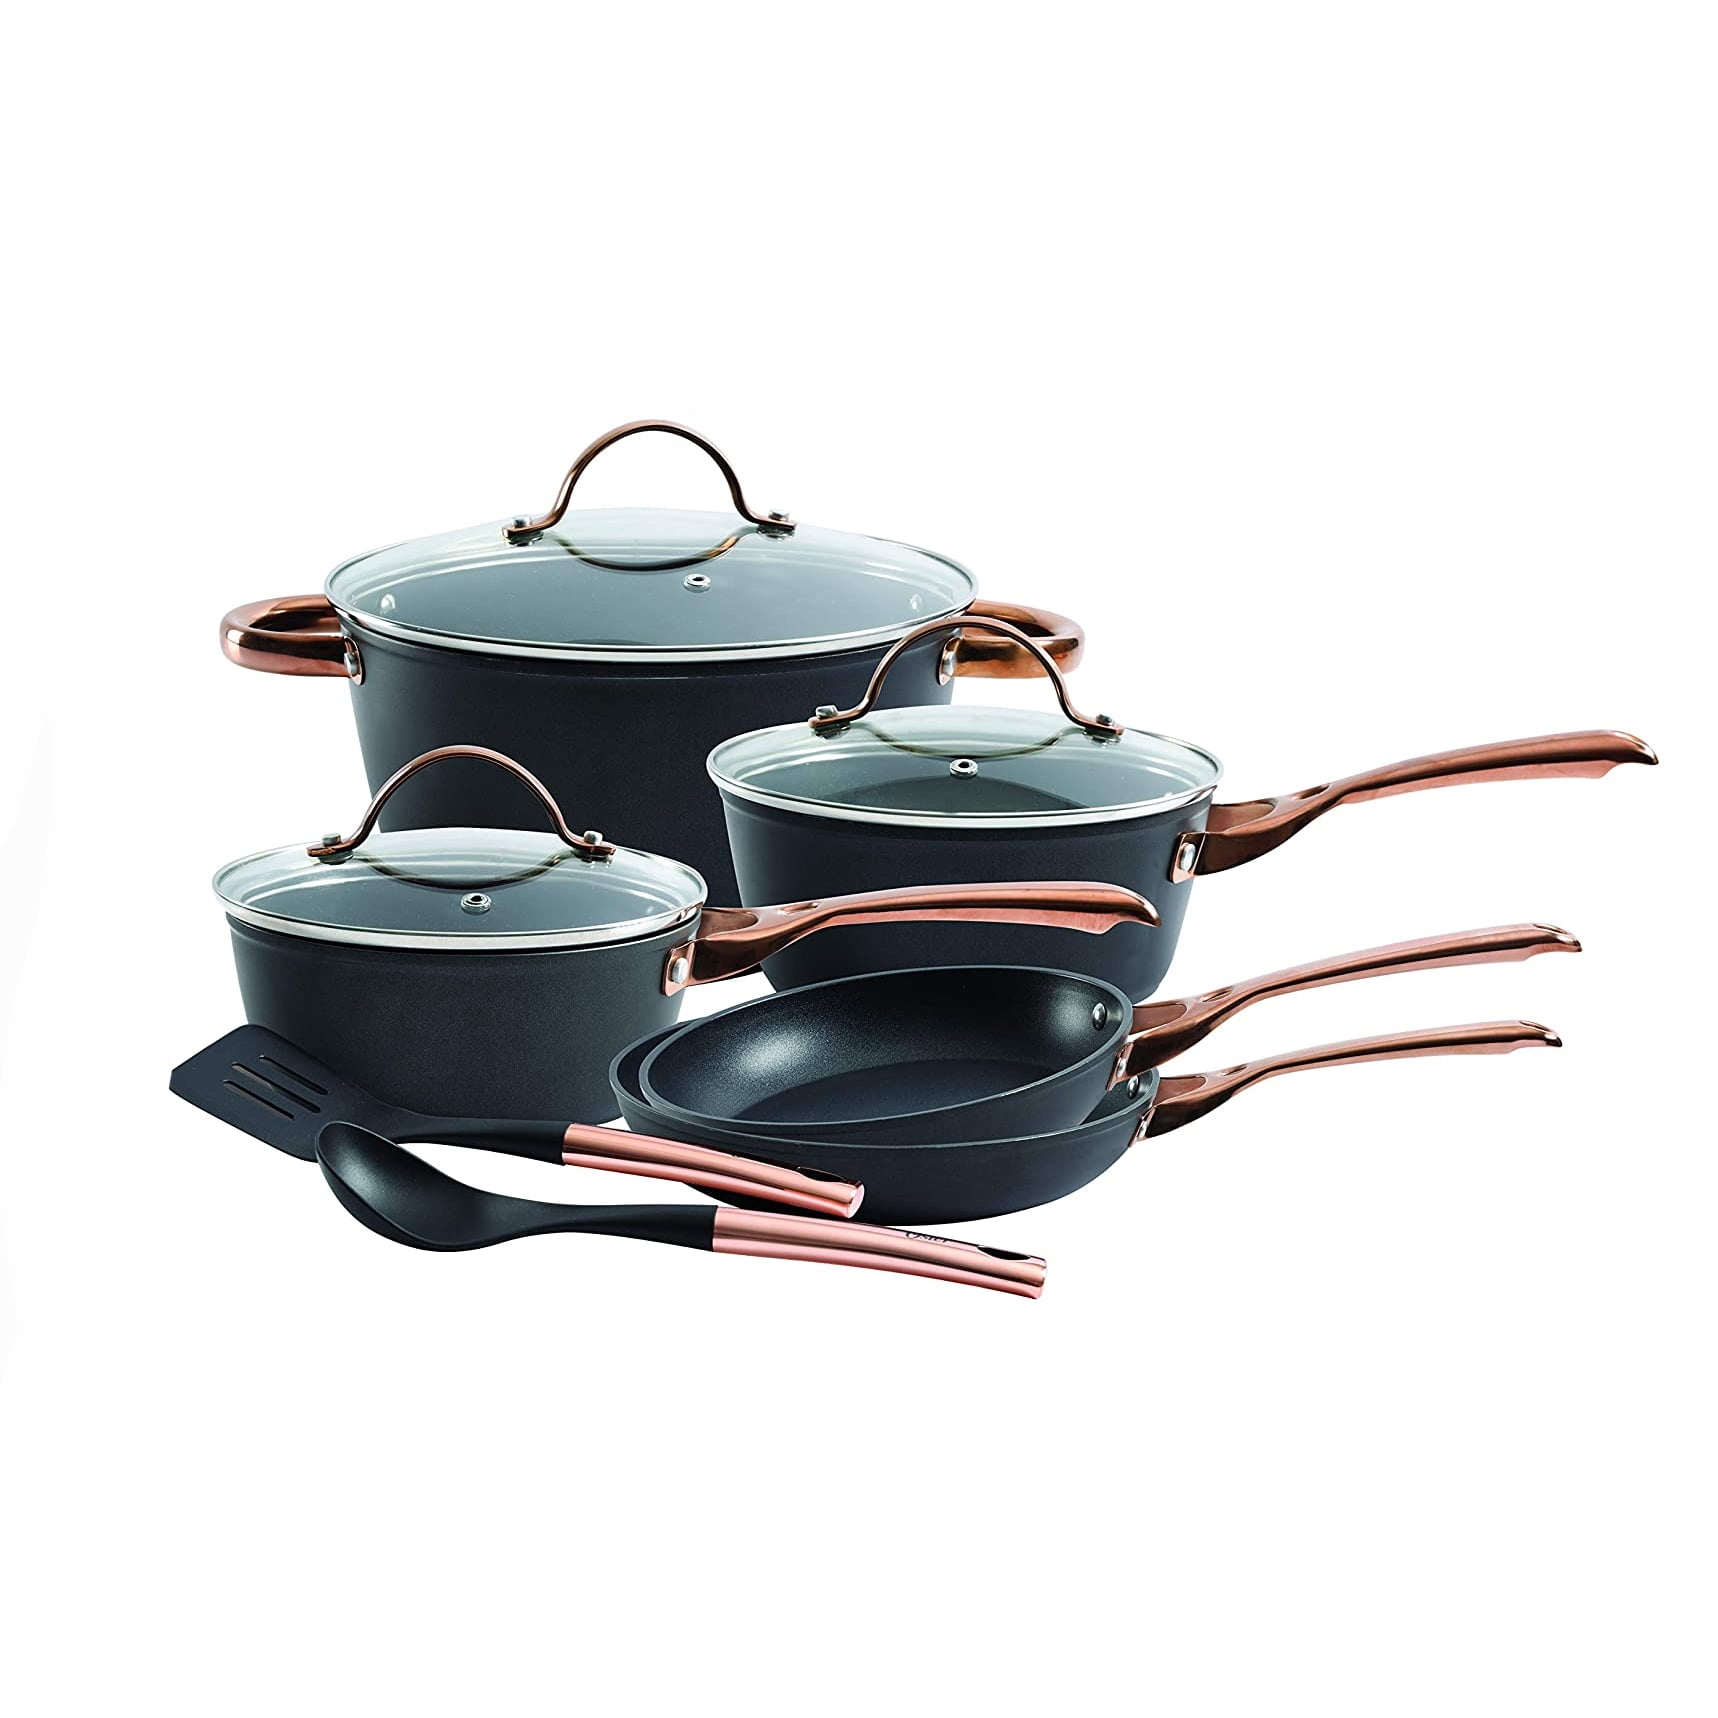 Ceramic Non-Stick Pans Clearance, Discounts & Rollbacks 